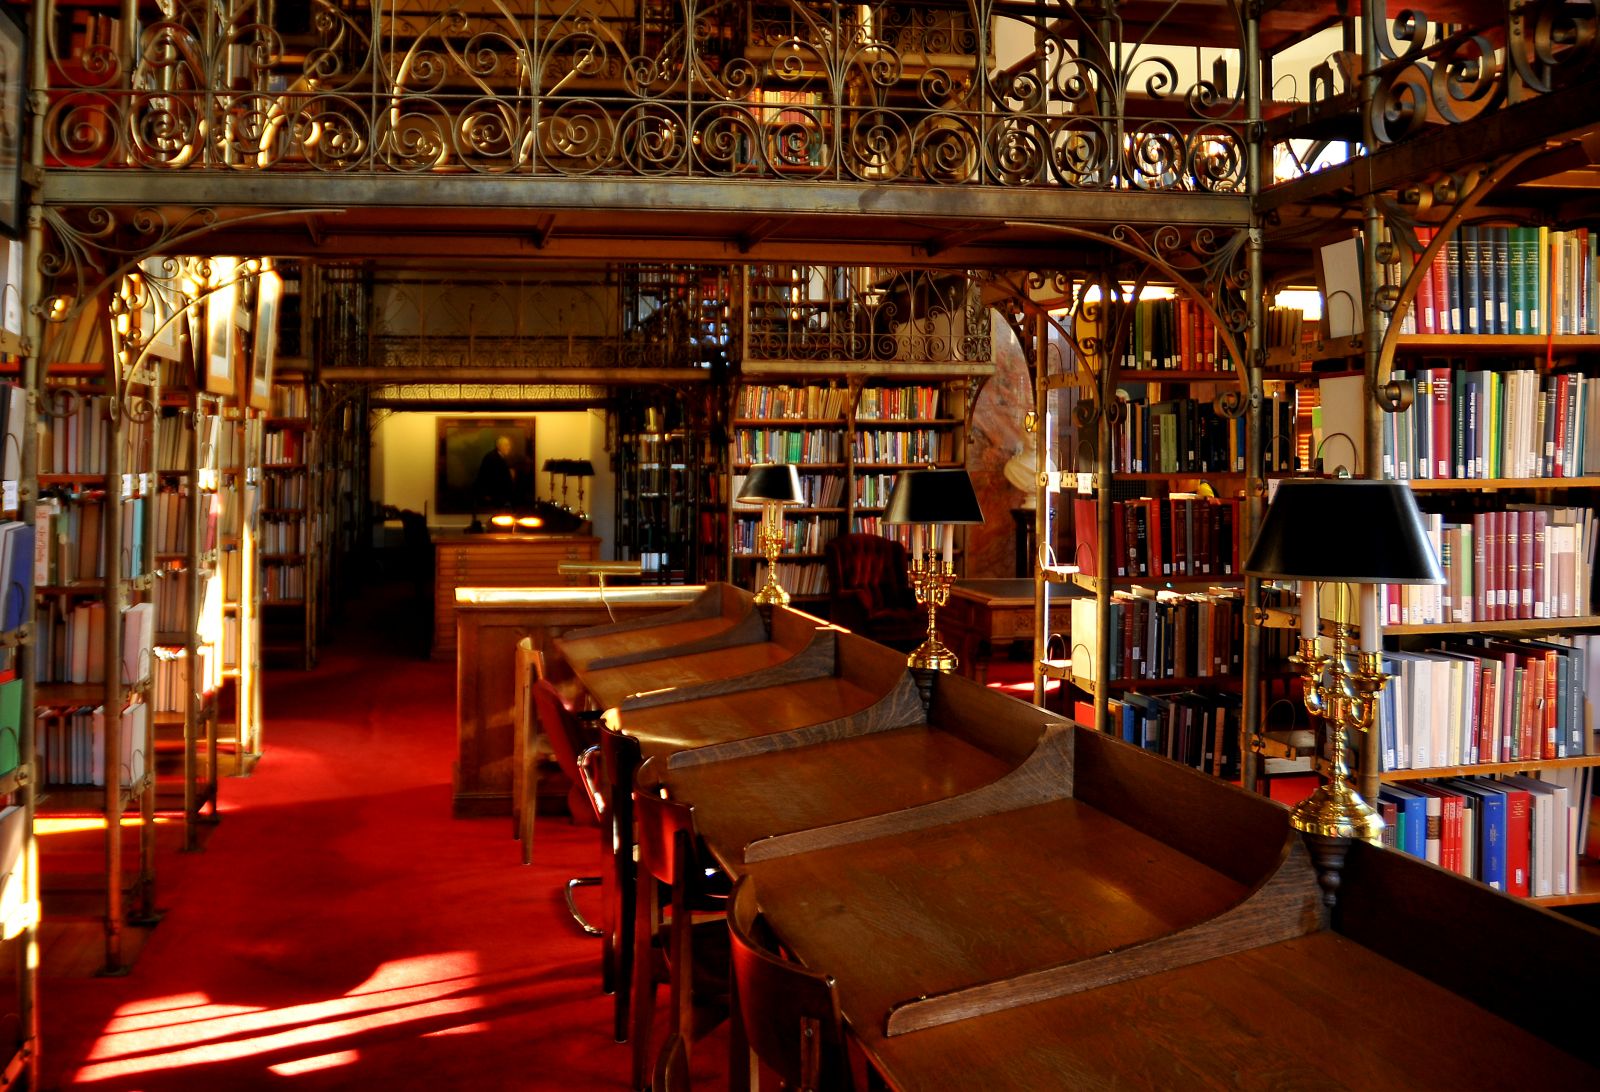 The 12 unbelievable libraries that make you feel like you are in a